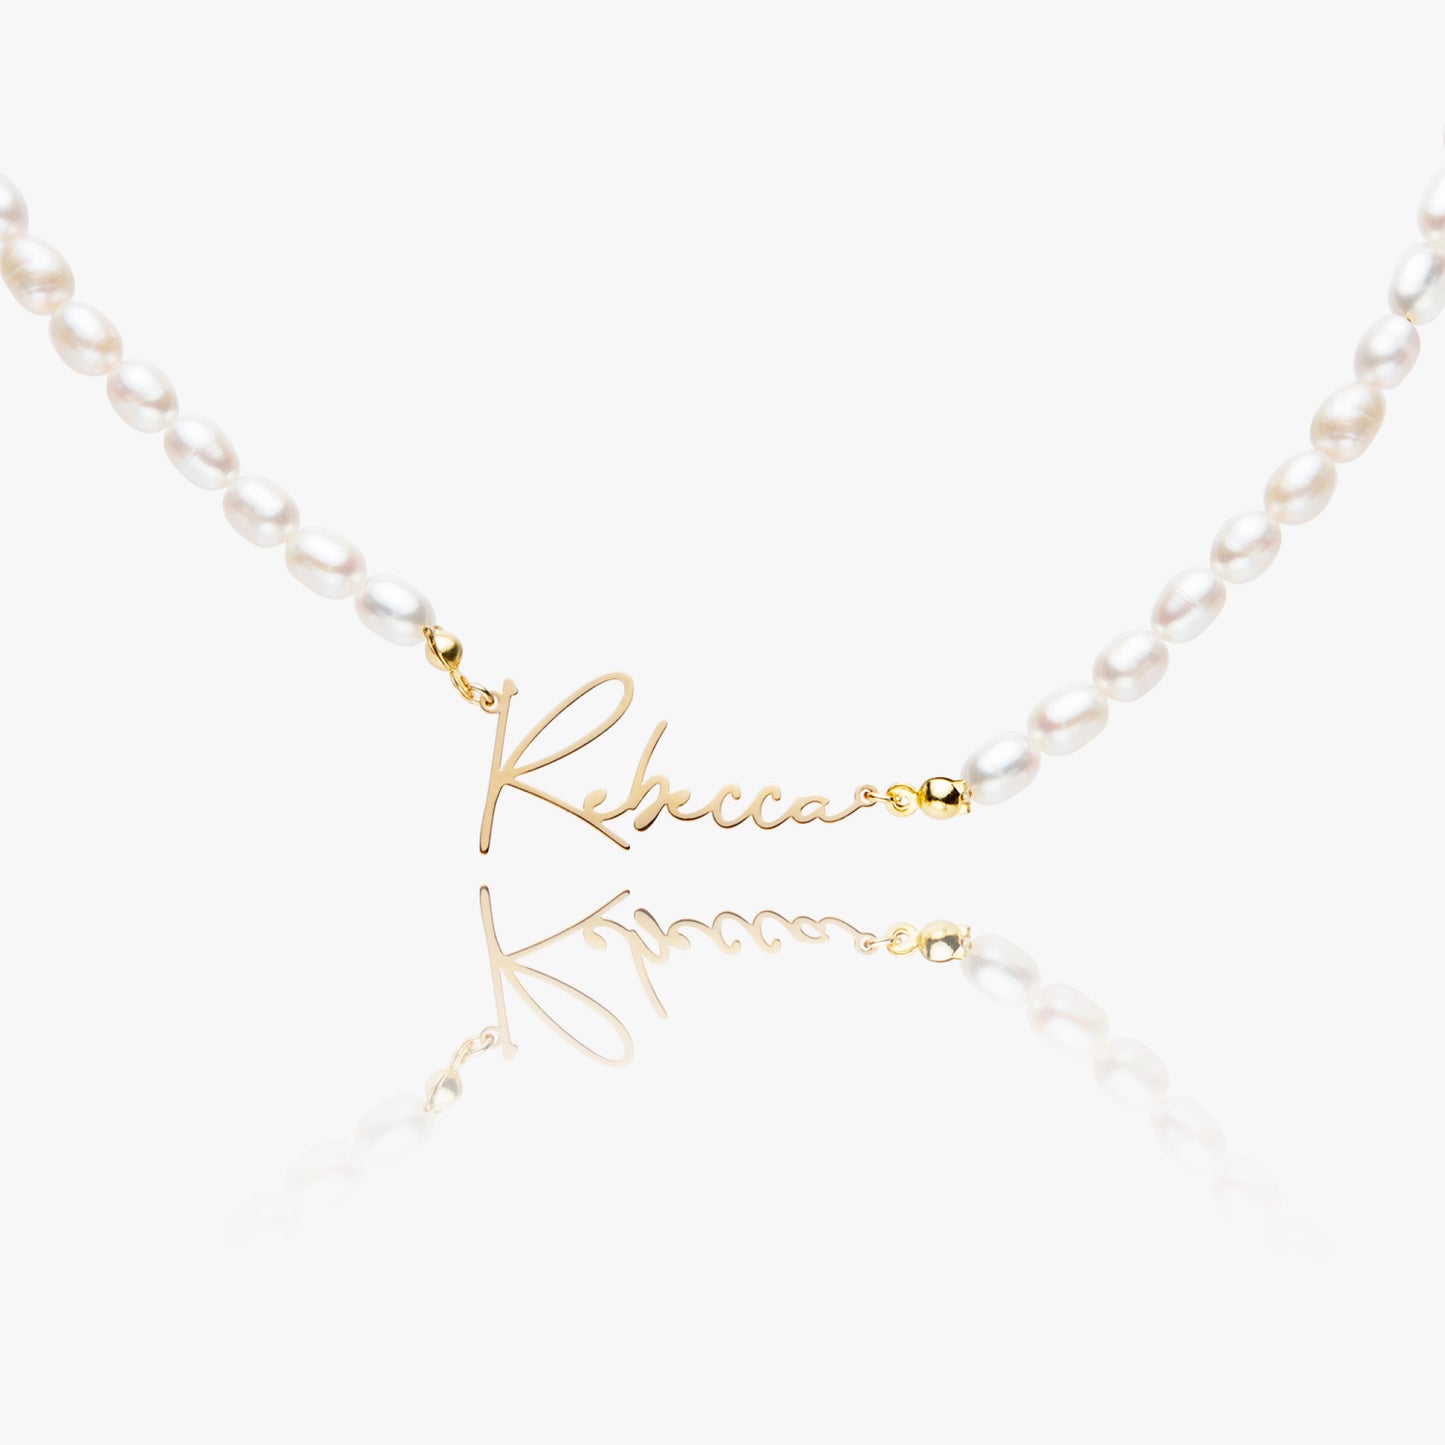 Pearlized Perfection: Personalized Name Necklace with Freshwater Flair!